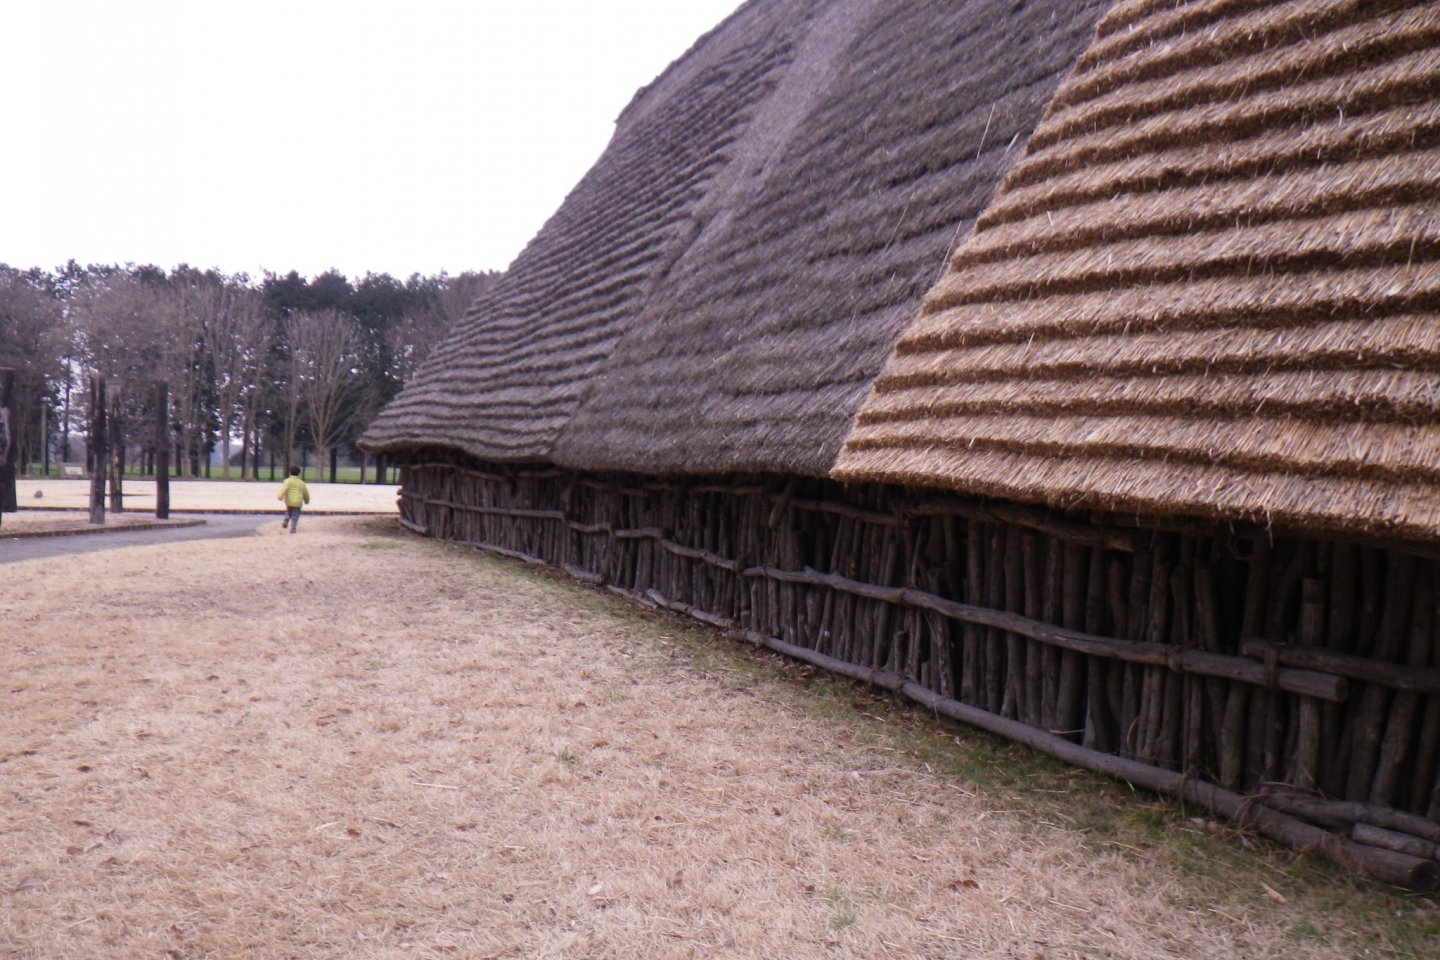 The largest of the pit houses